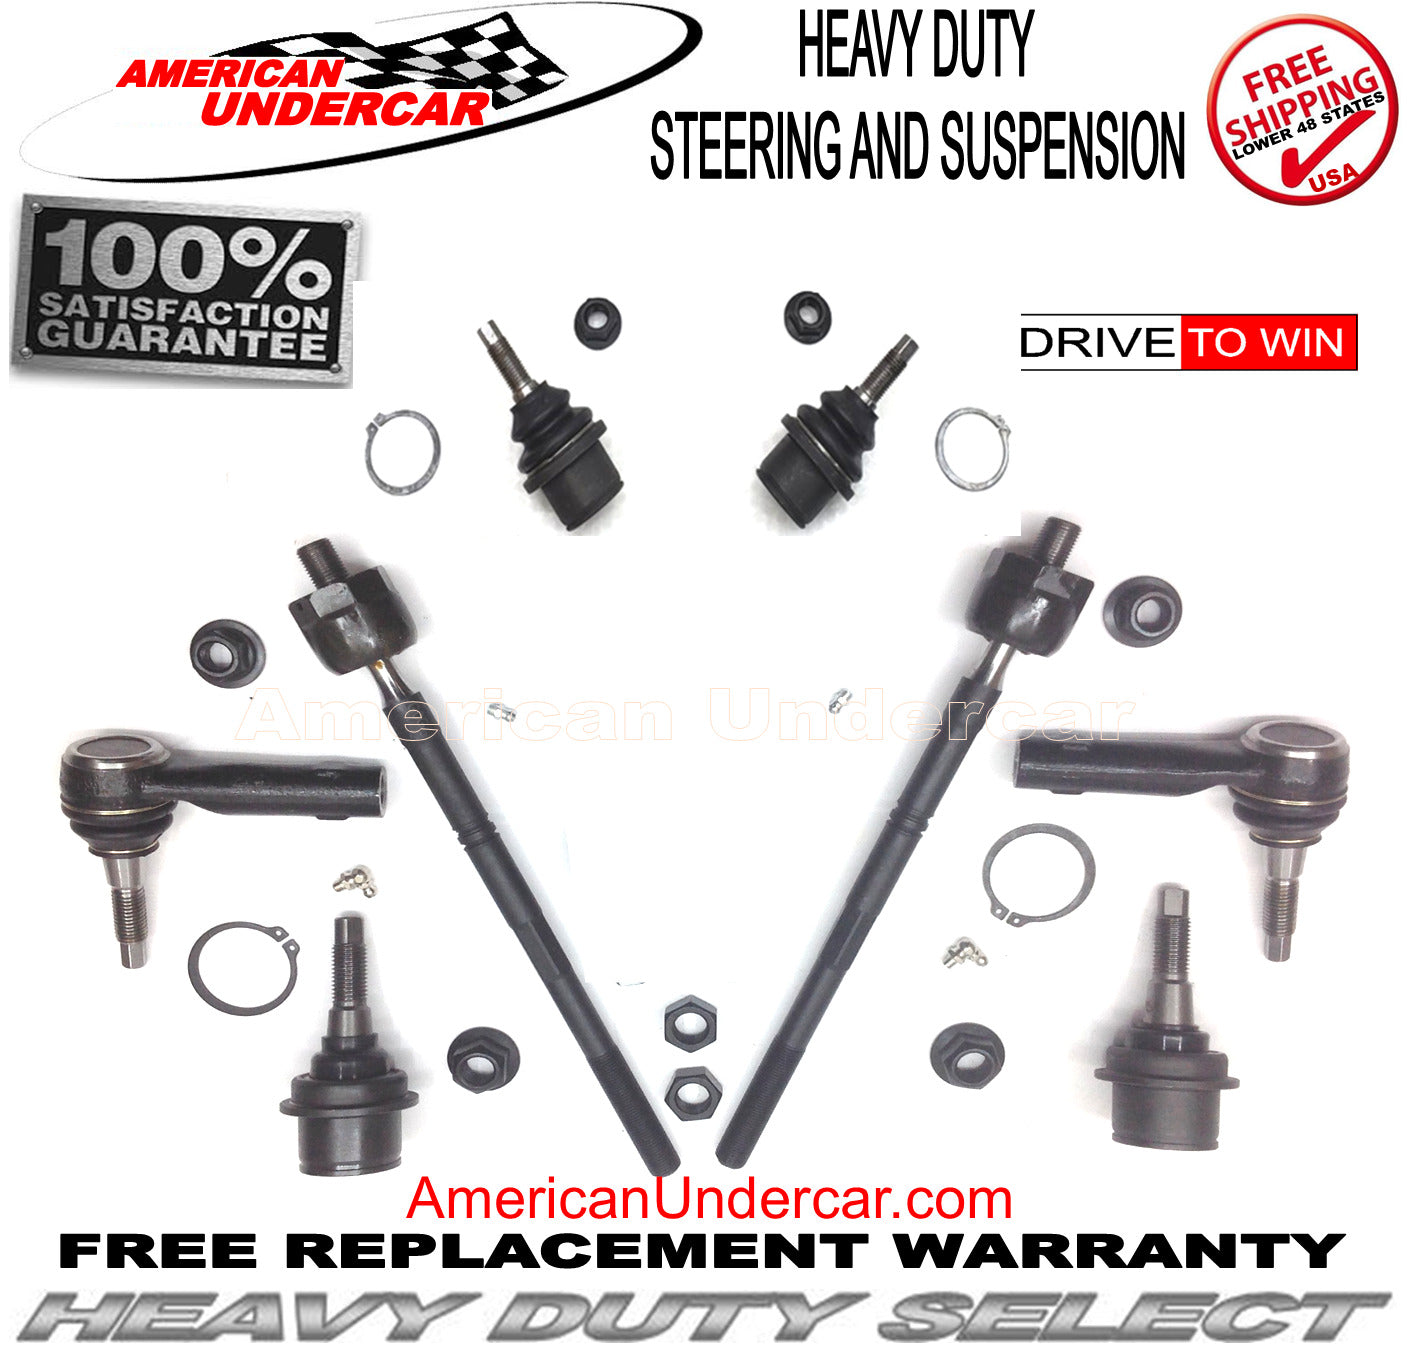 HD Ball Joints Tie Rod Steering and Suspension Kit for 2015-2020 Ford F150 4x4